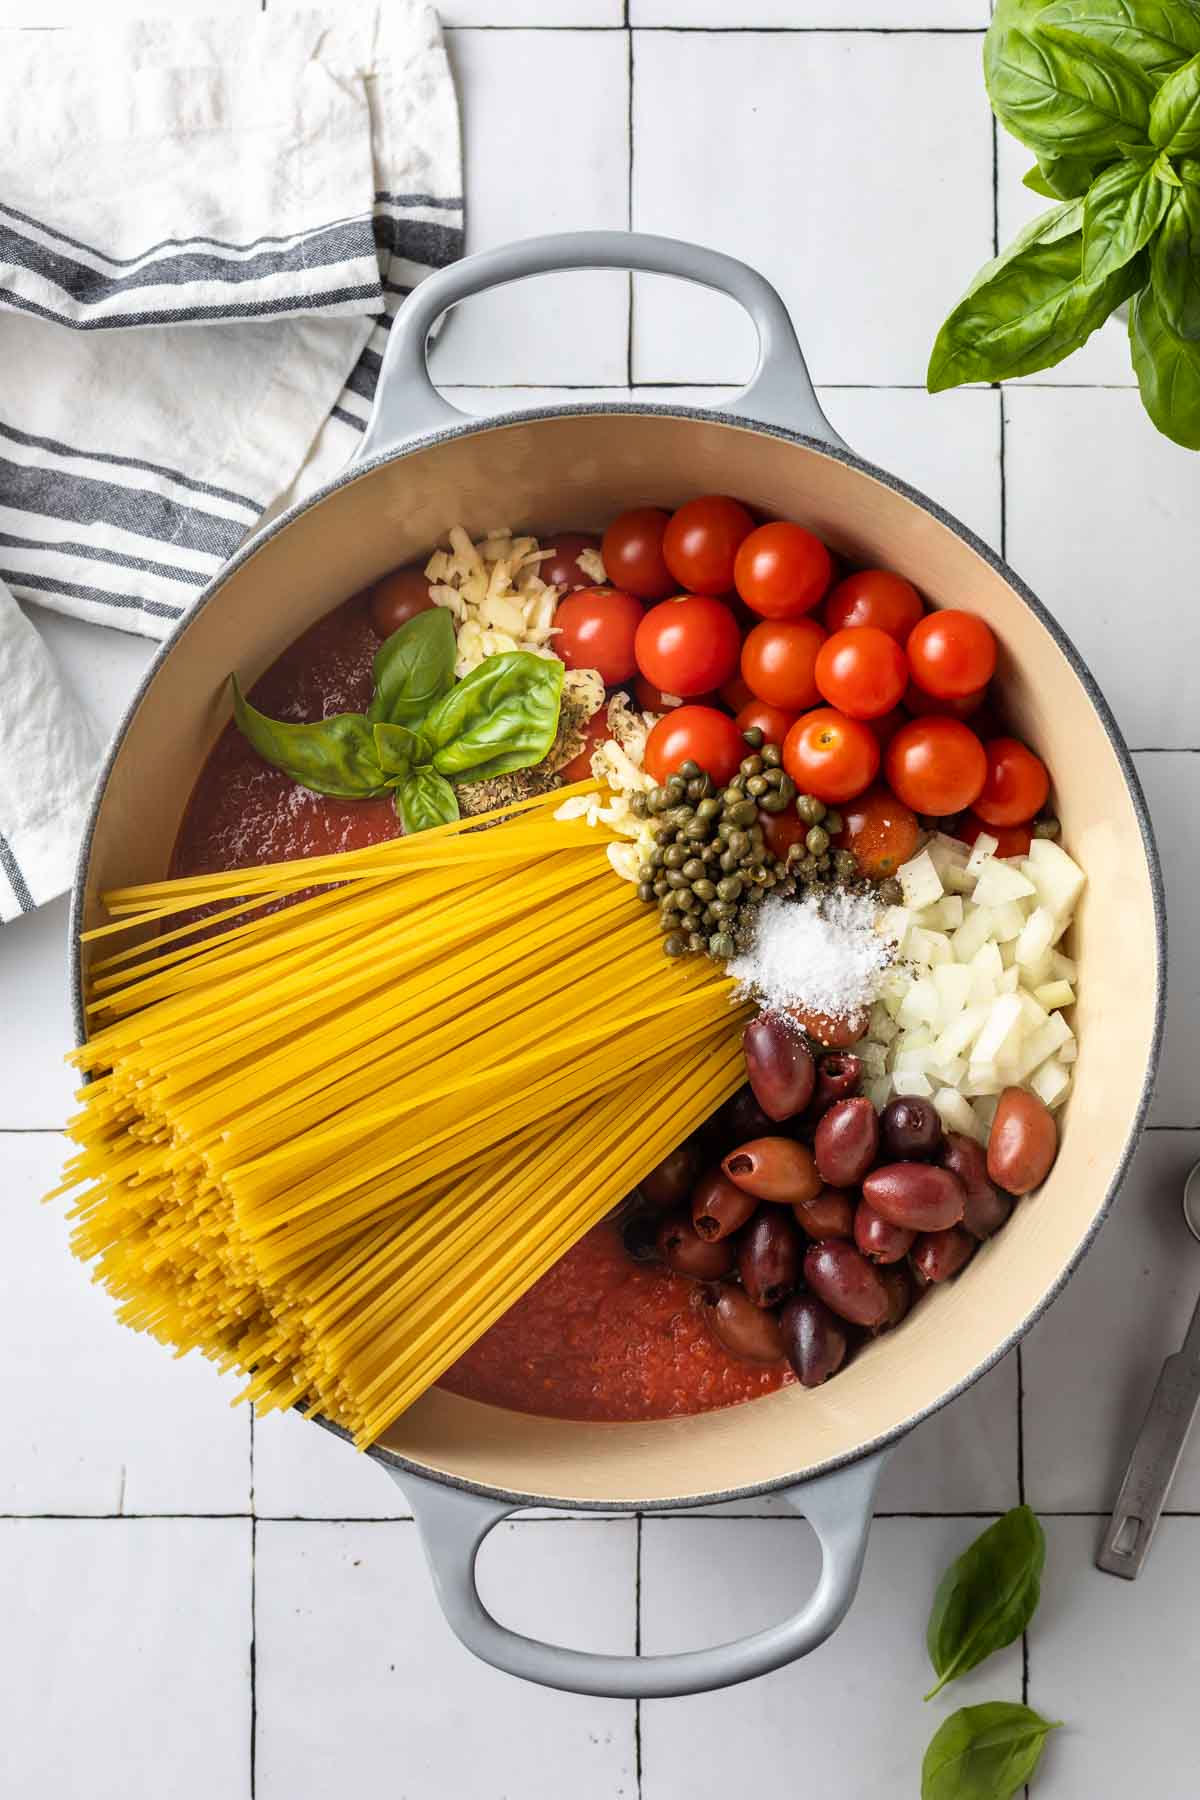 Large stockpot with spaghetti, tomato sauce, capers, onions, cherry tomatoes, kalamata olives, basil leaves, garlic, and salt